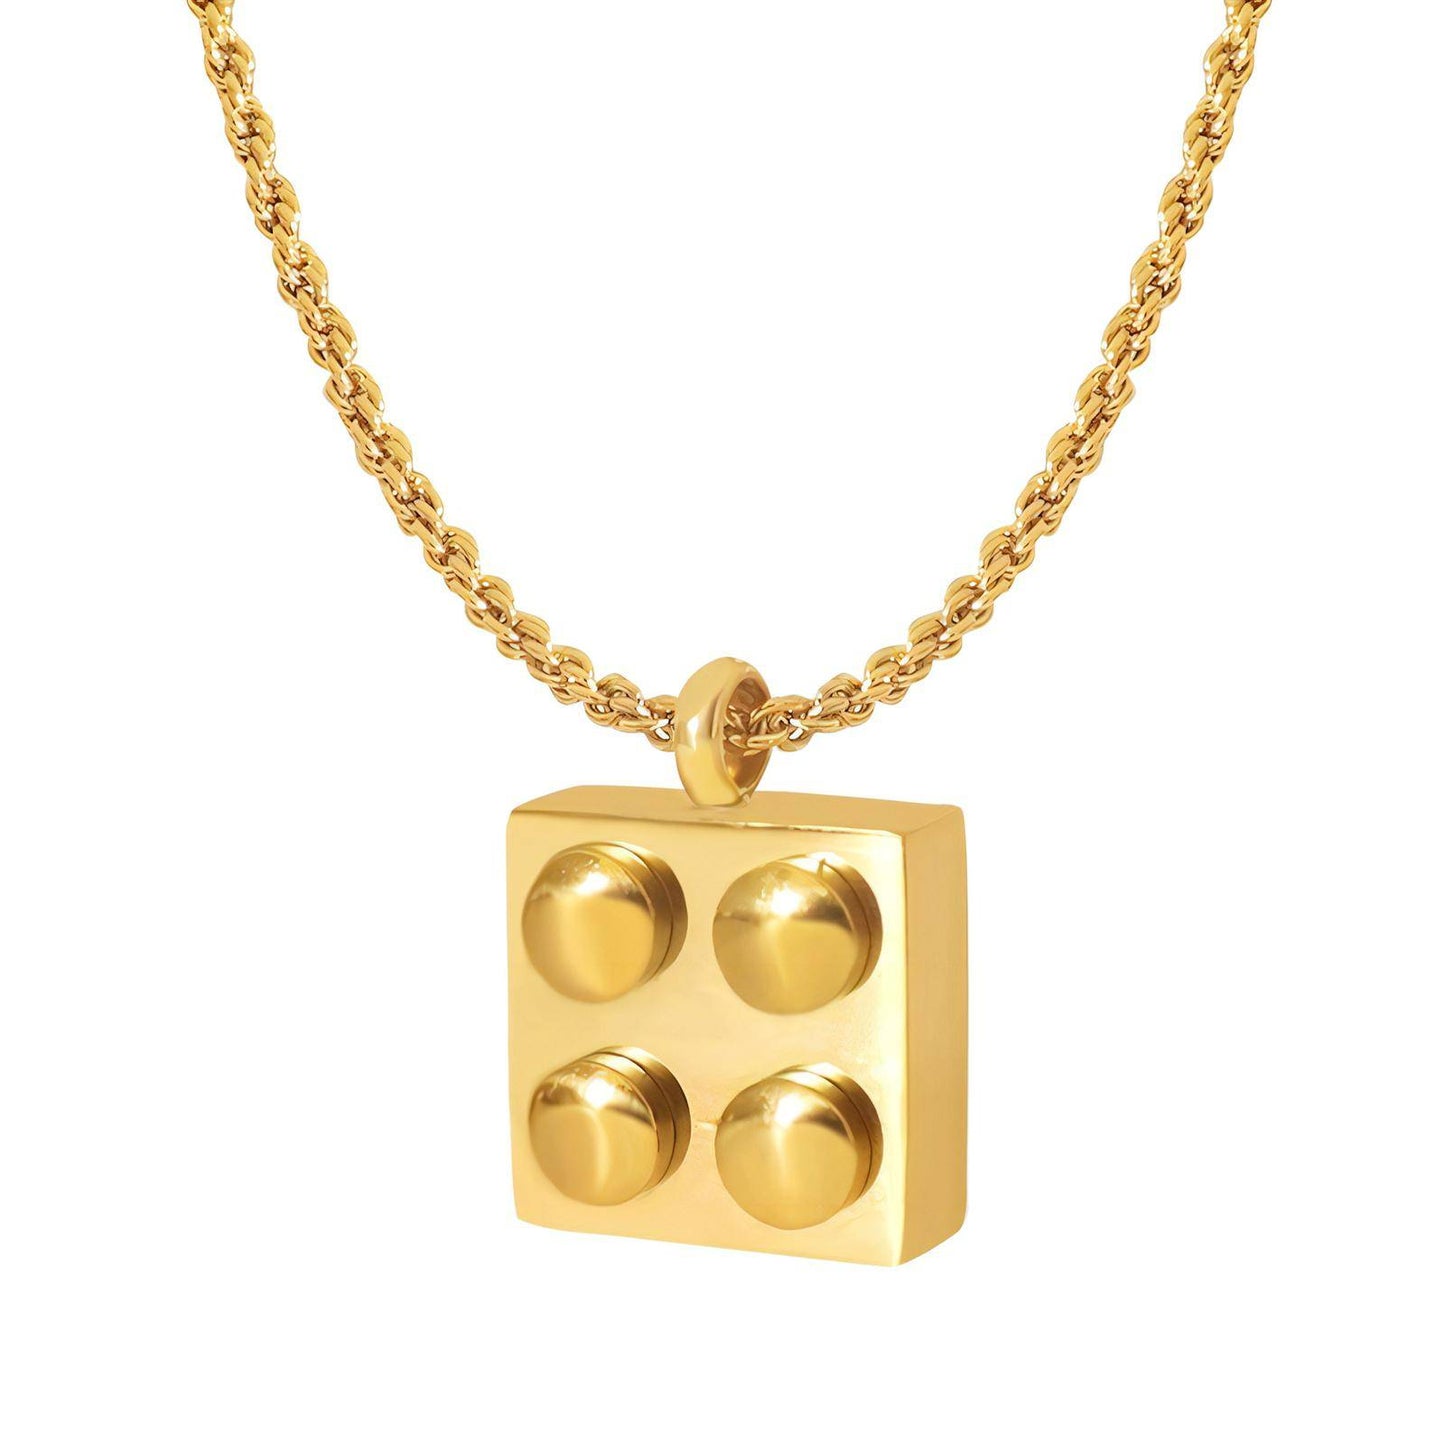 18K gold plated Stainless steel  Constructor piece necklace